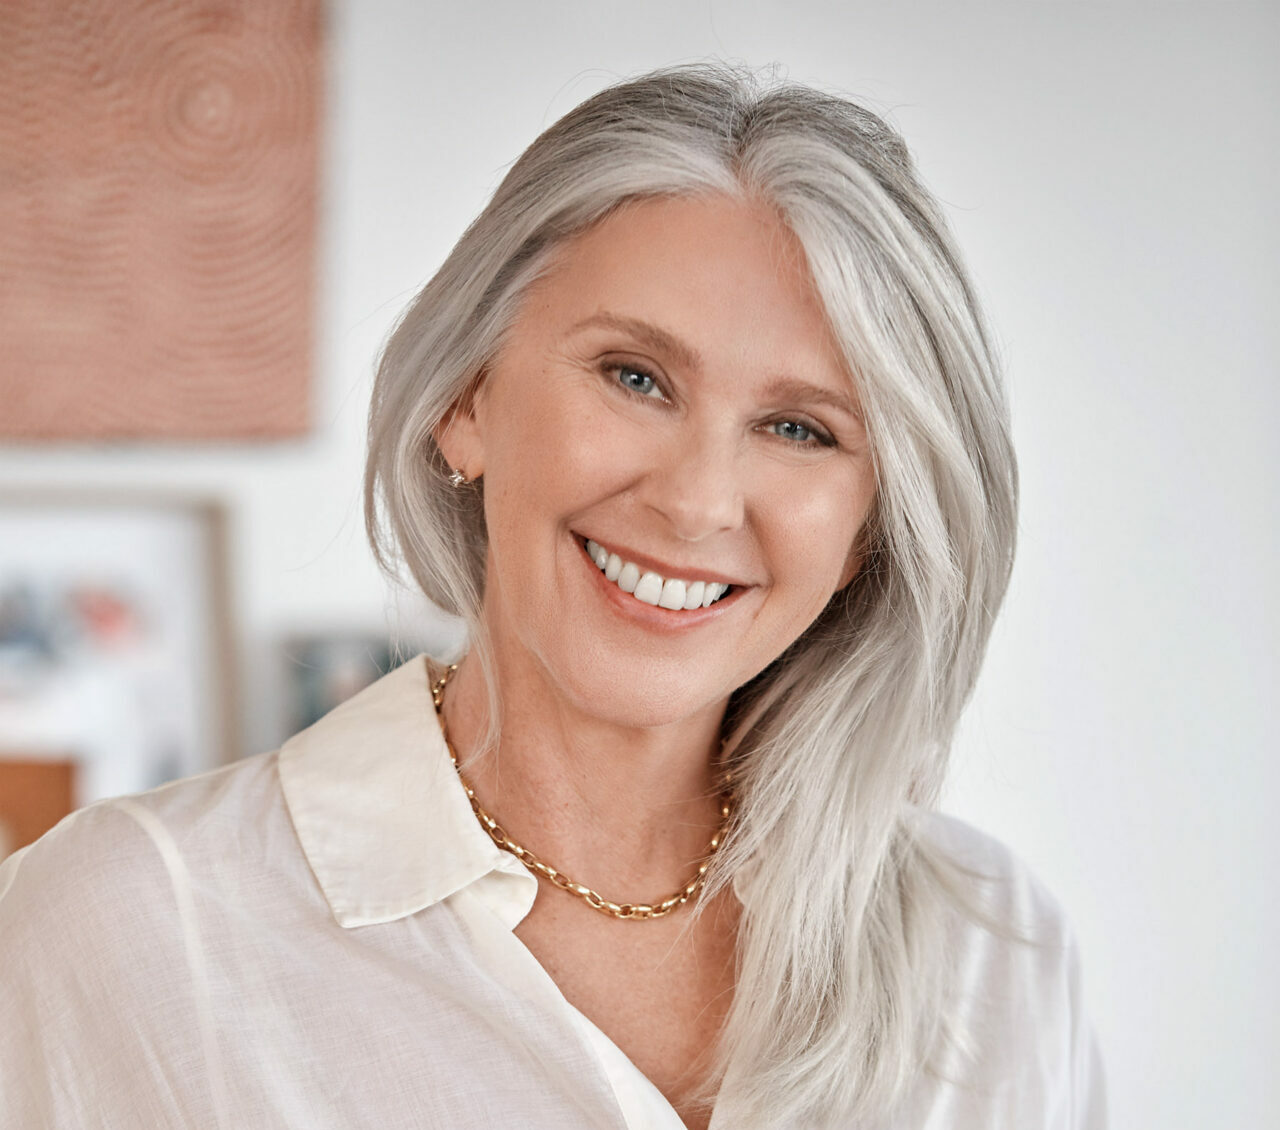 A woman with long grey hair and a button-up white dress smiles widely